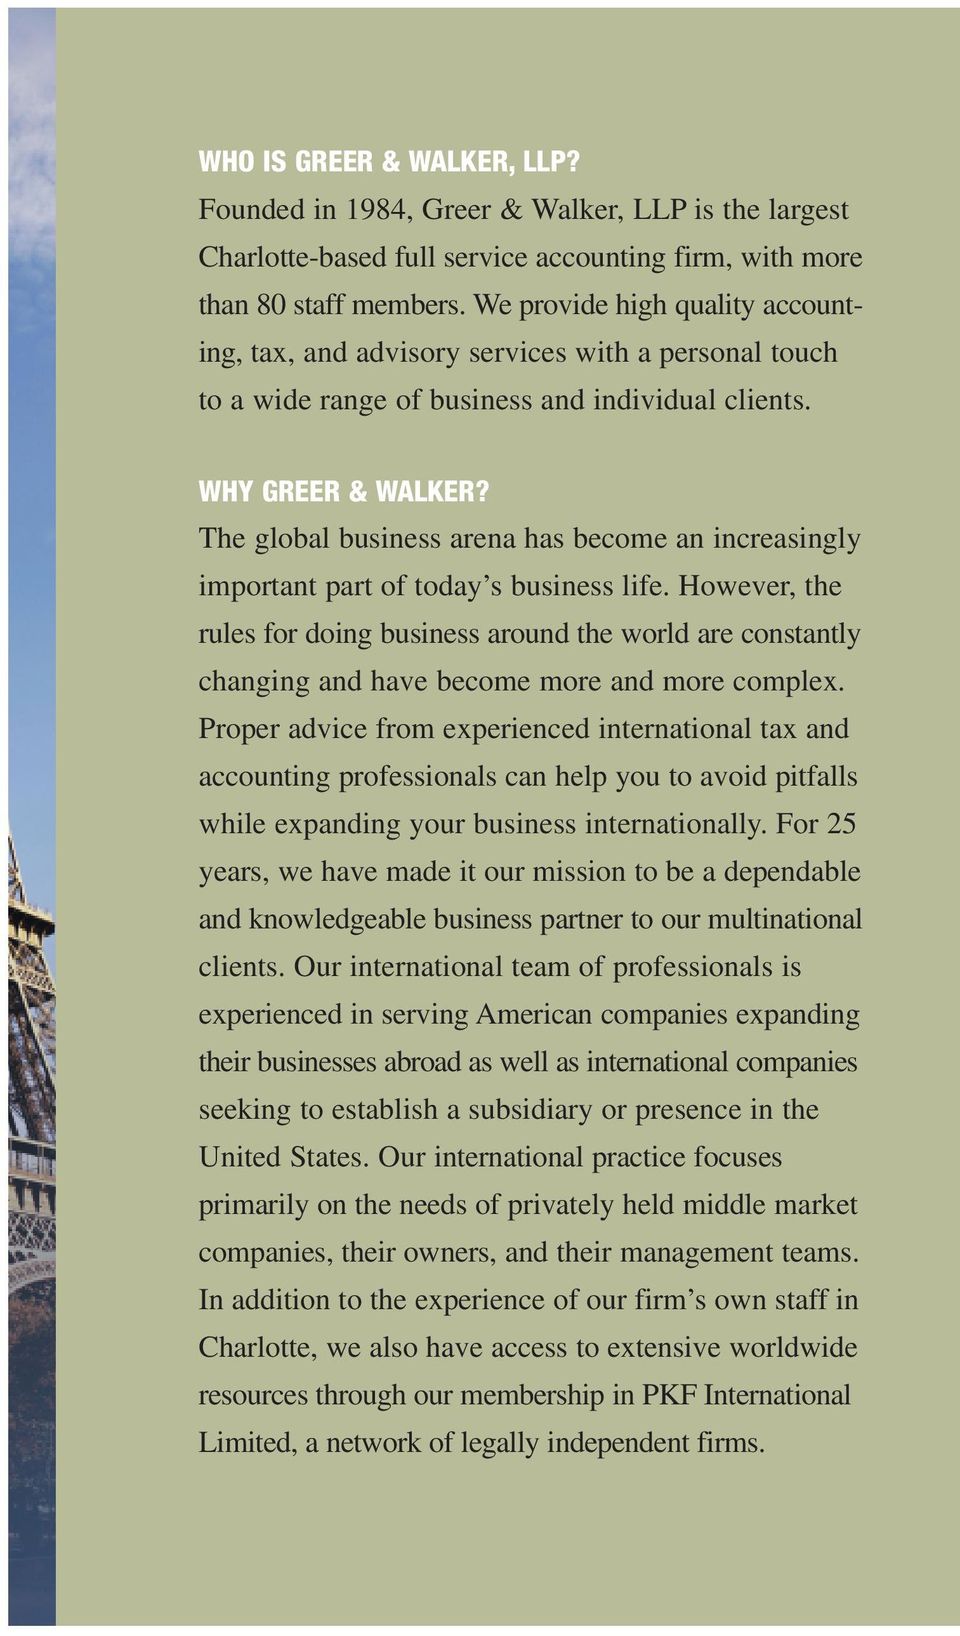 The global business arena has become an increasingly important part of today s business life.